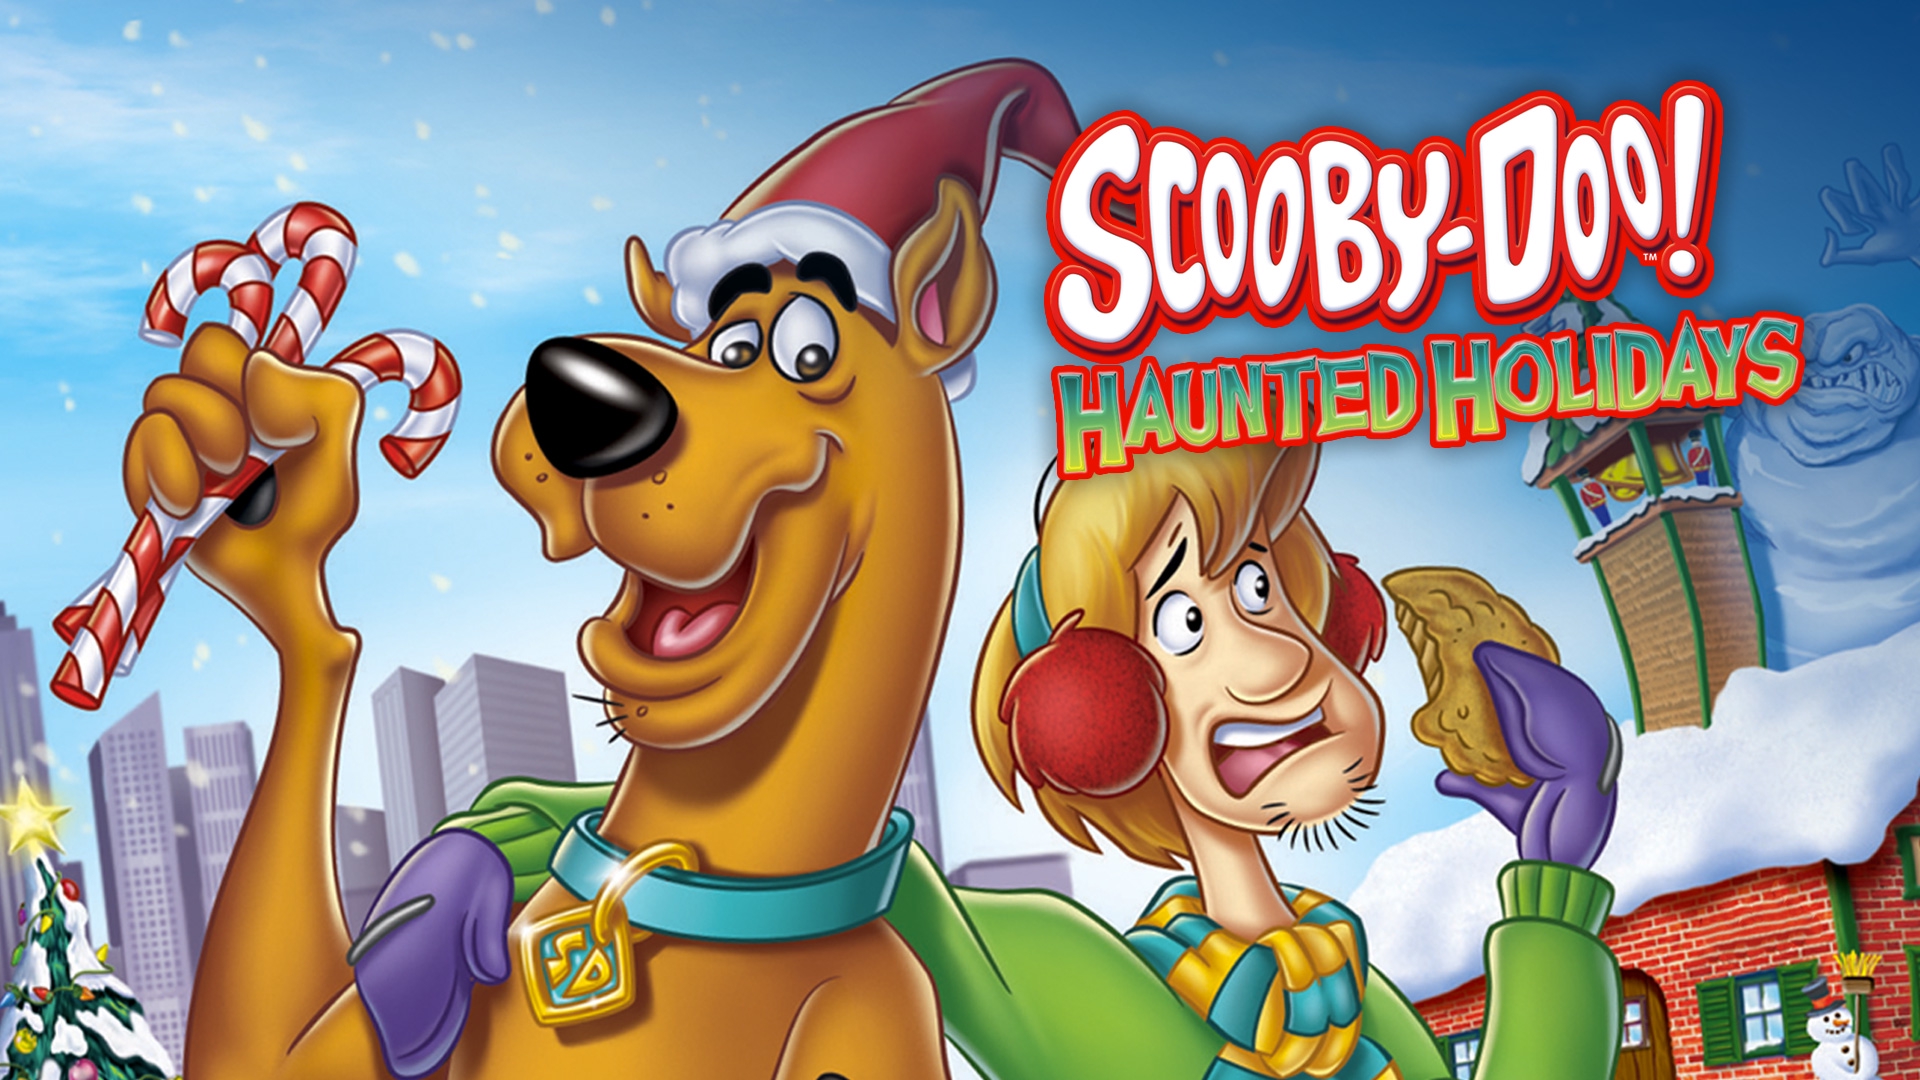 Stream Scooby-Doo! Haunted Holidays Online | Download and Watch HD ...